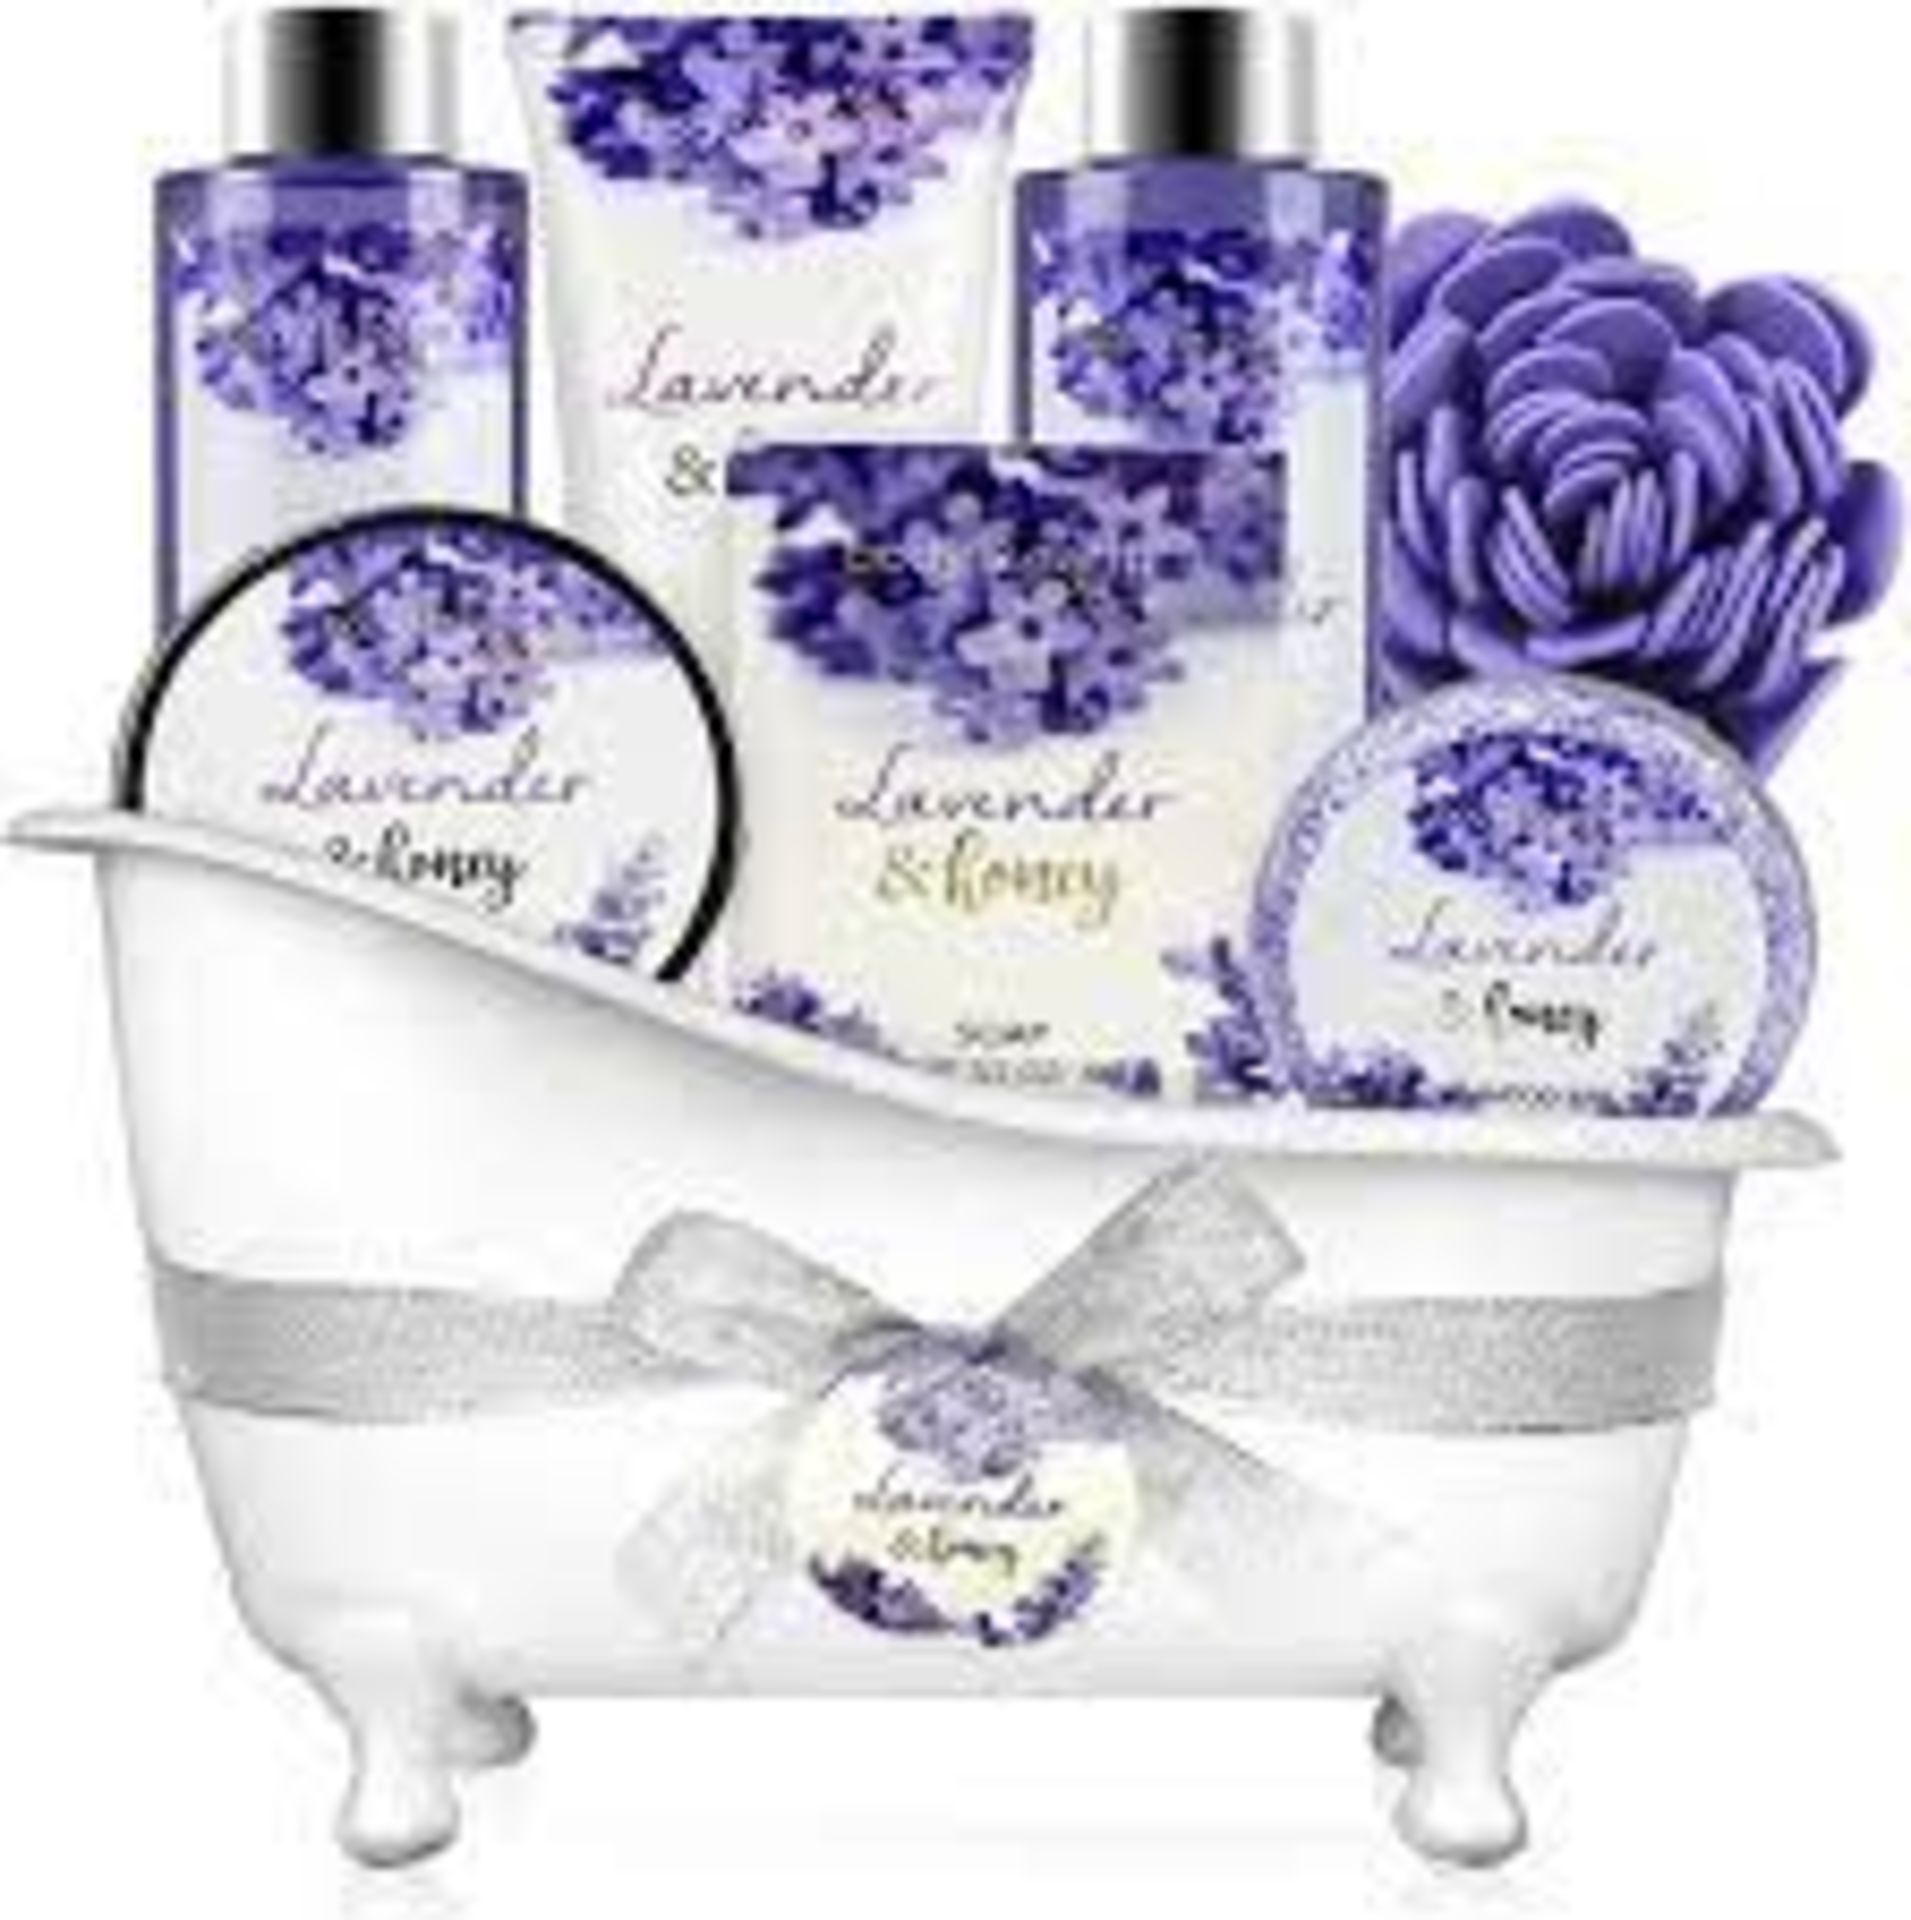 3 x NEW PACKAGED BODY EARTH Lavender Honey Spa Bathtub Set. (ROW12) Contents: This bath set includes